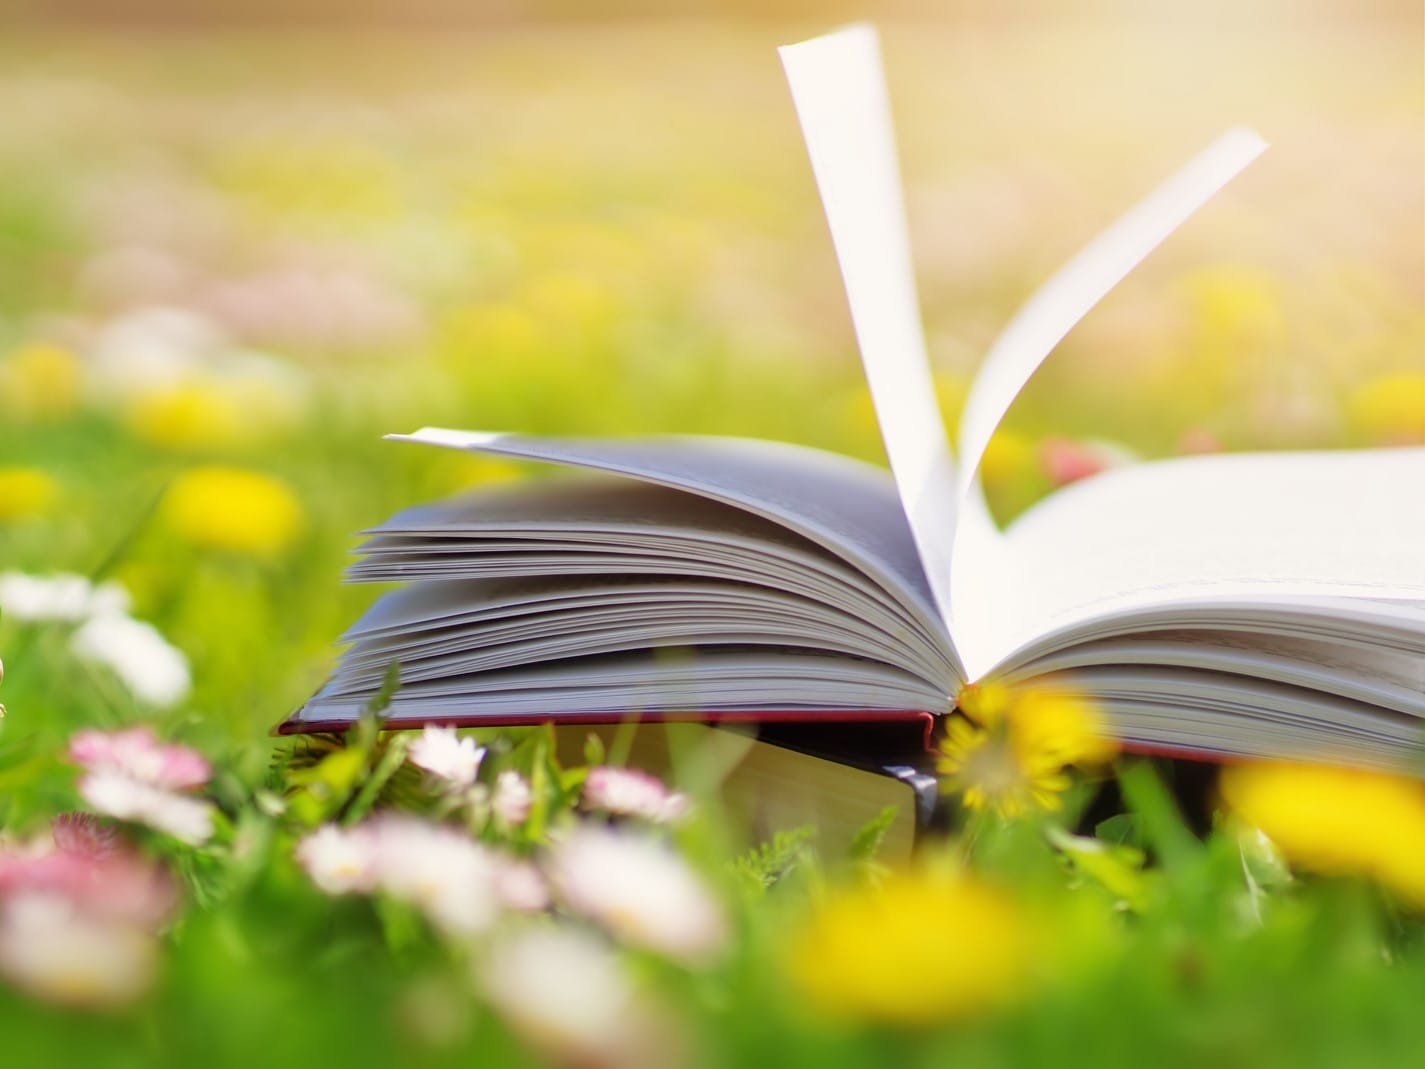 Open book in a grassy field on a sunny day in spring.